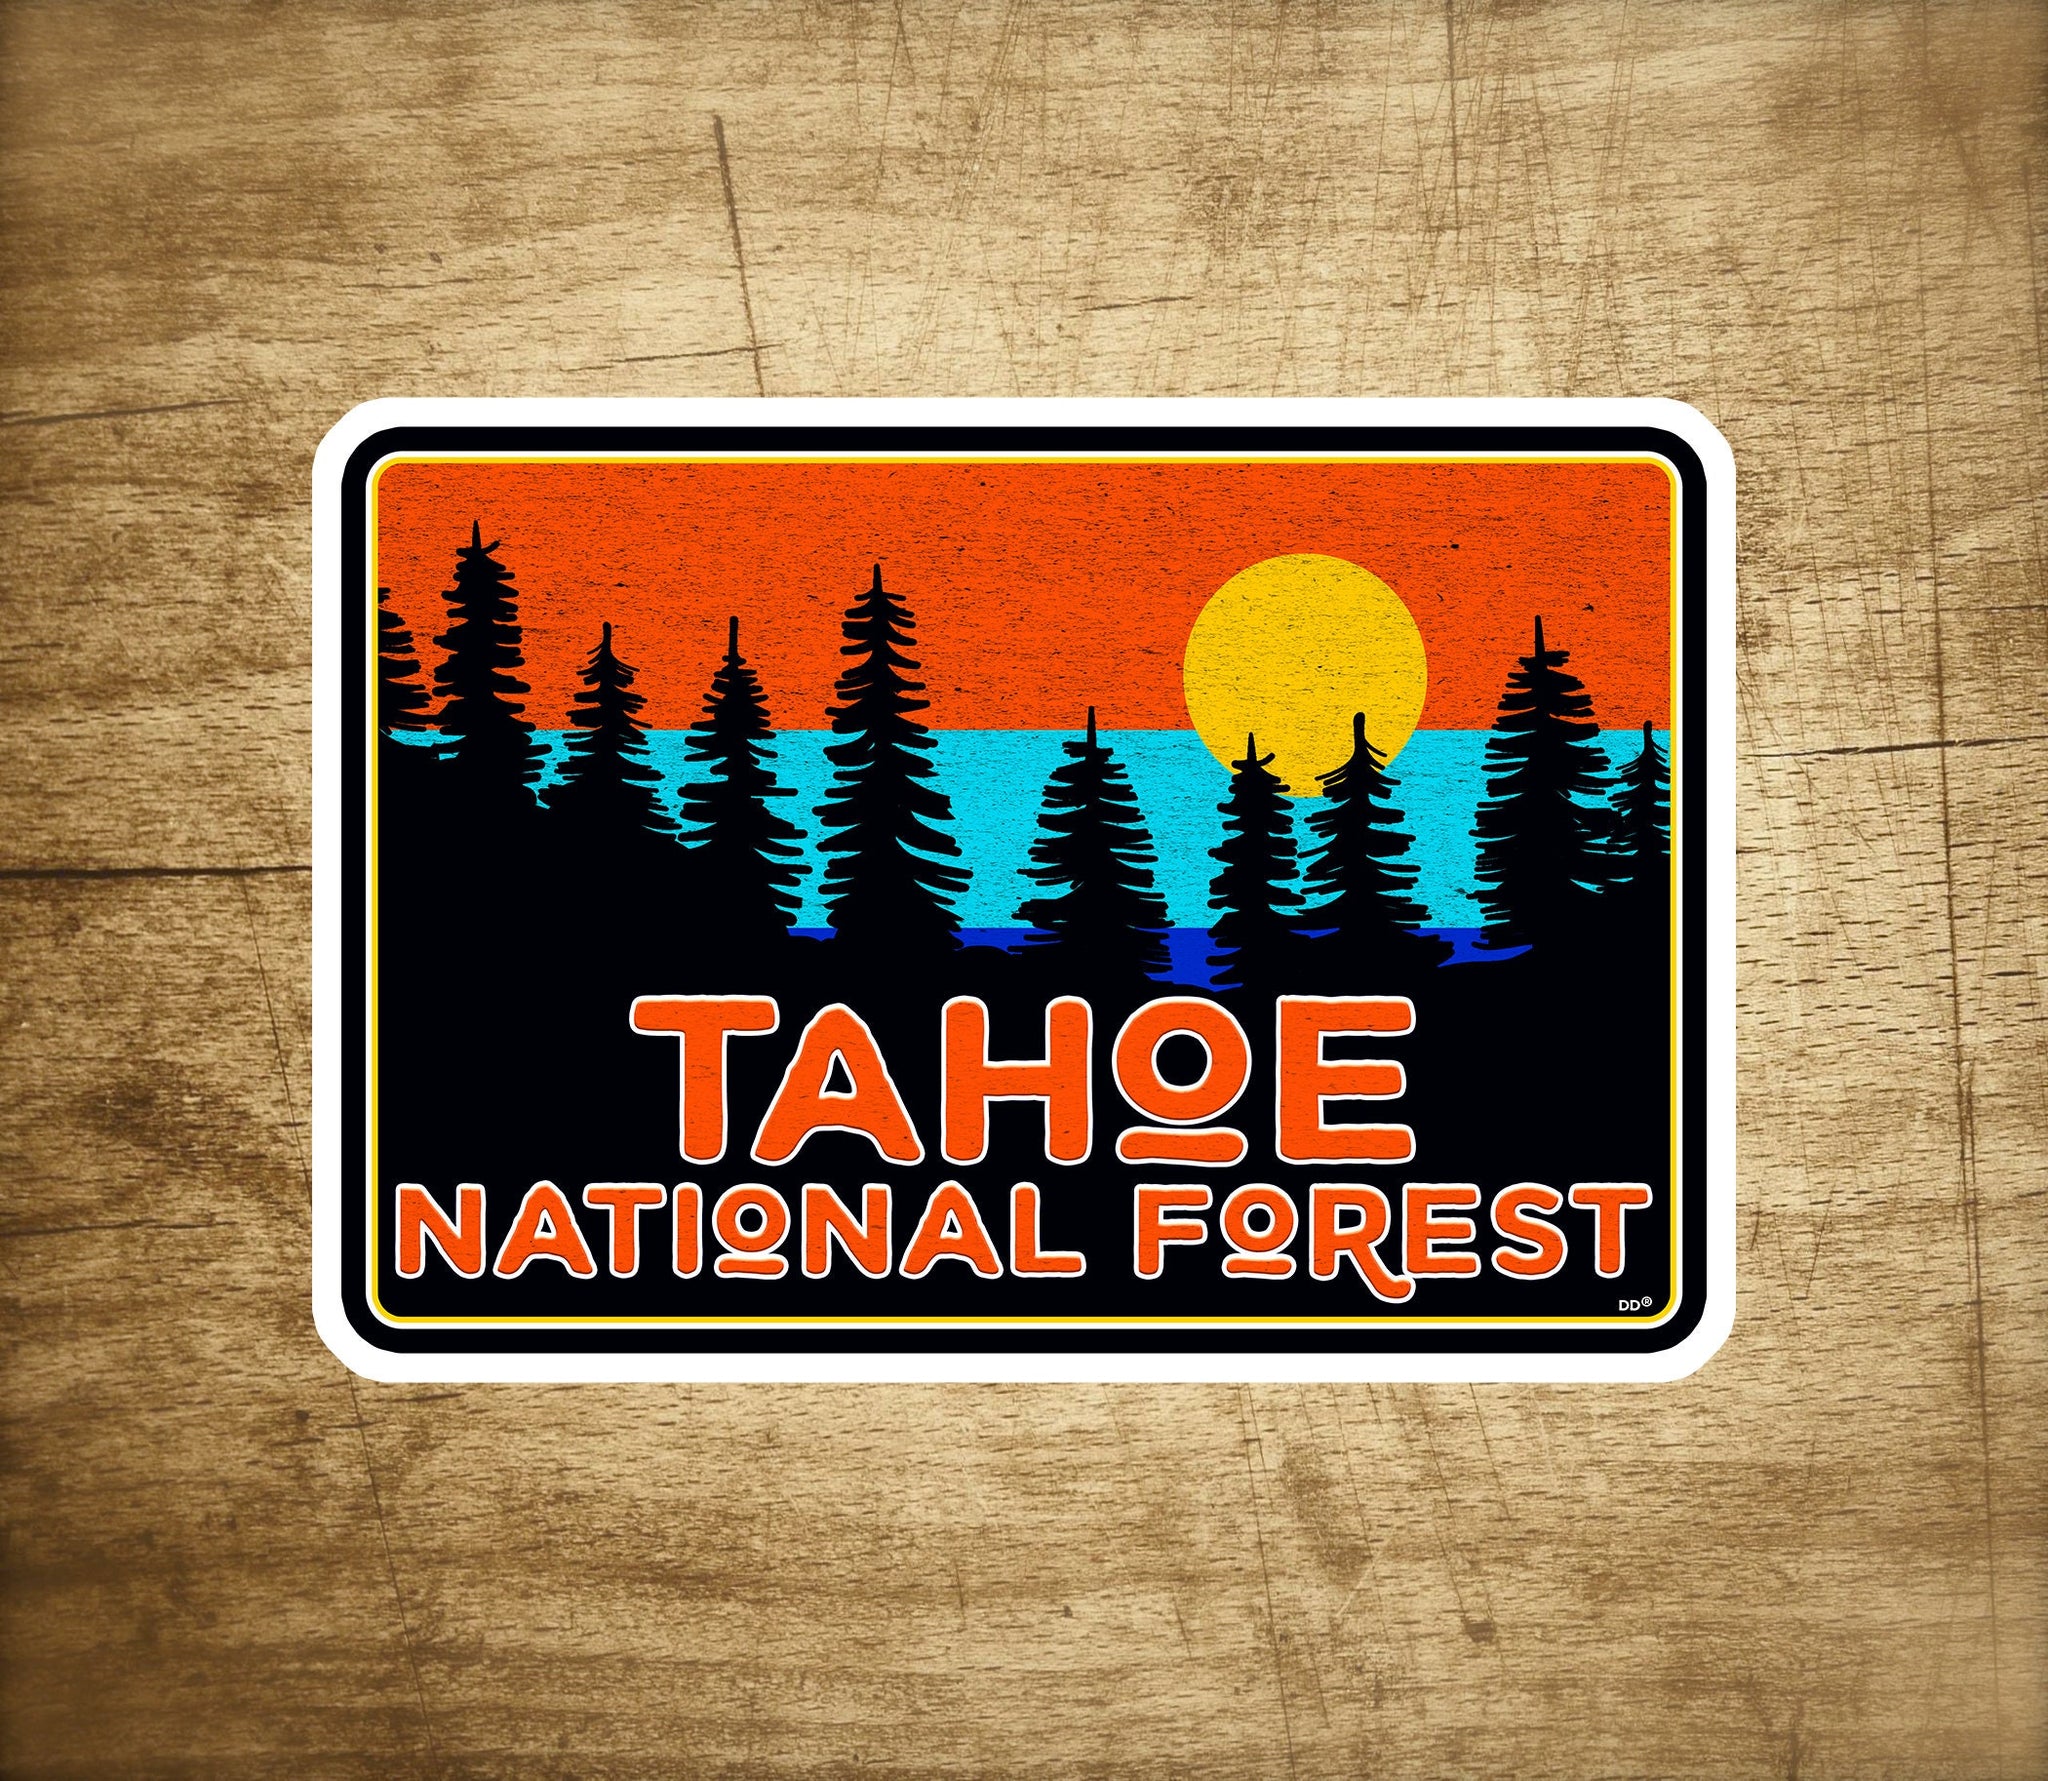 National Park Stickers Any 5 Decals for 21 Dollars Travel Skiing Free Shipping